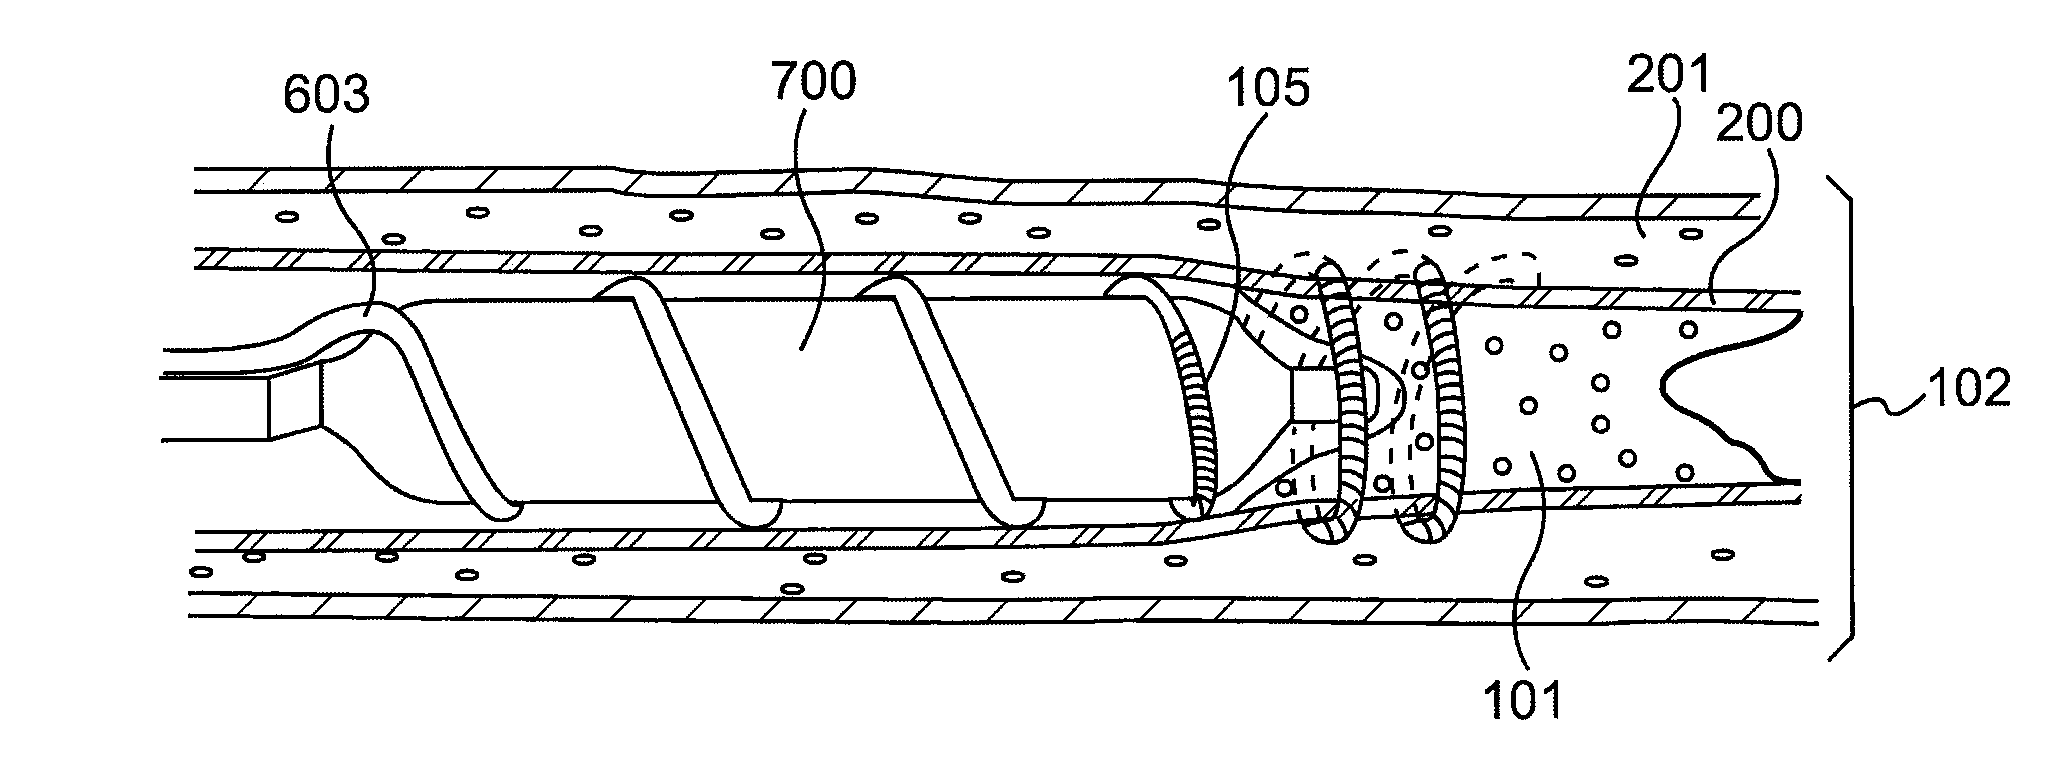 Endovascular devices and methods